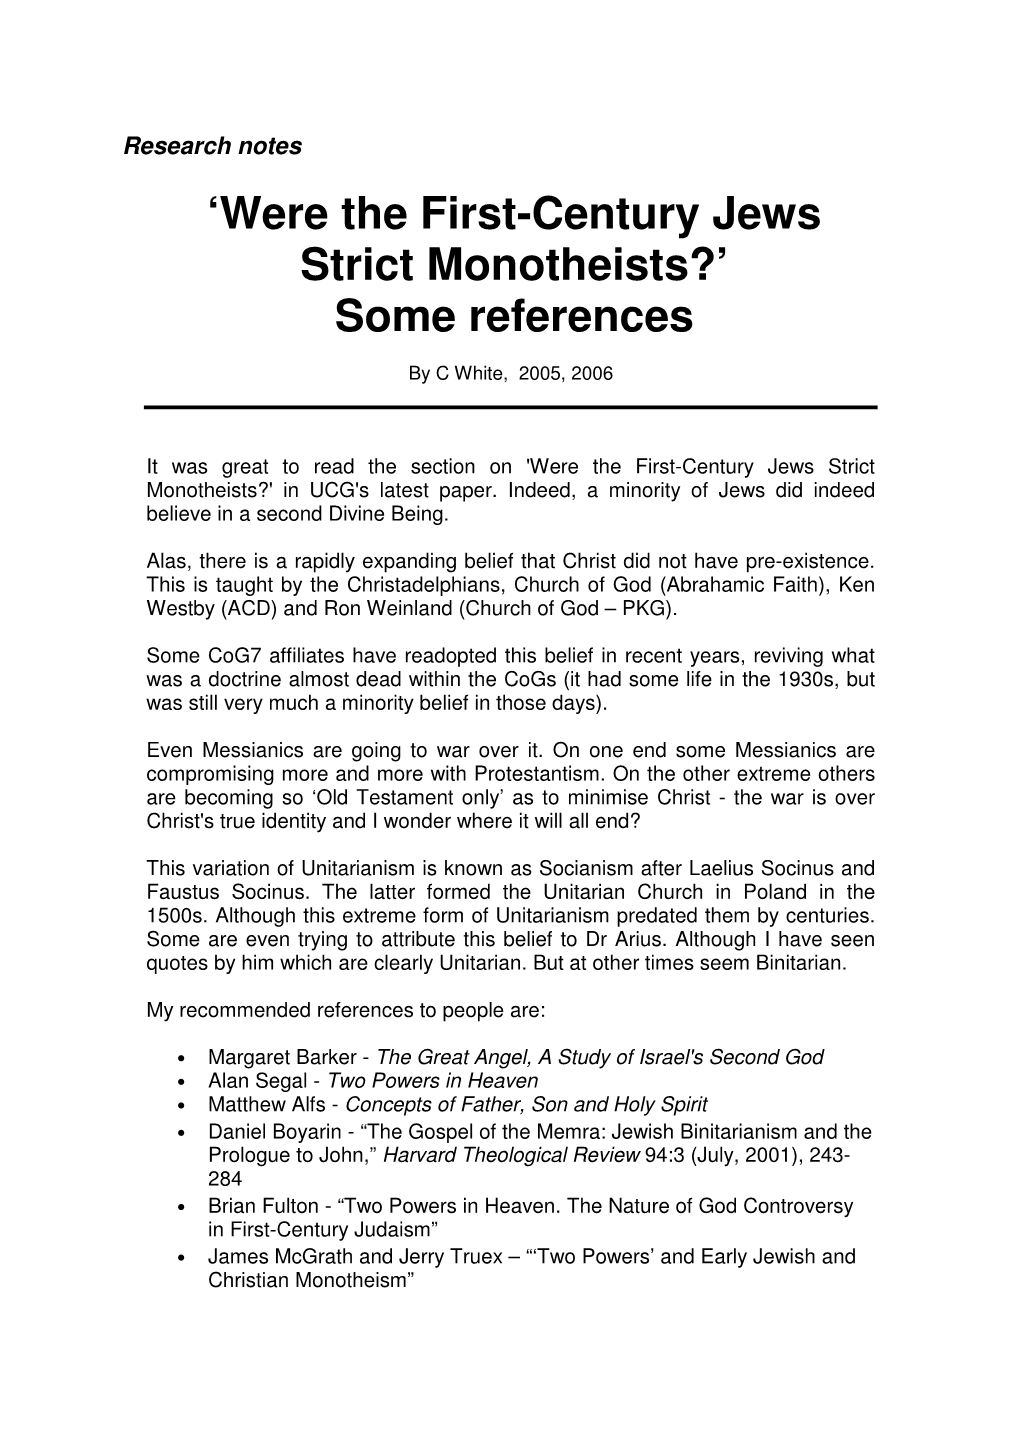 Were the First-Century Jews Strict Monotheists?’ Some References